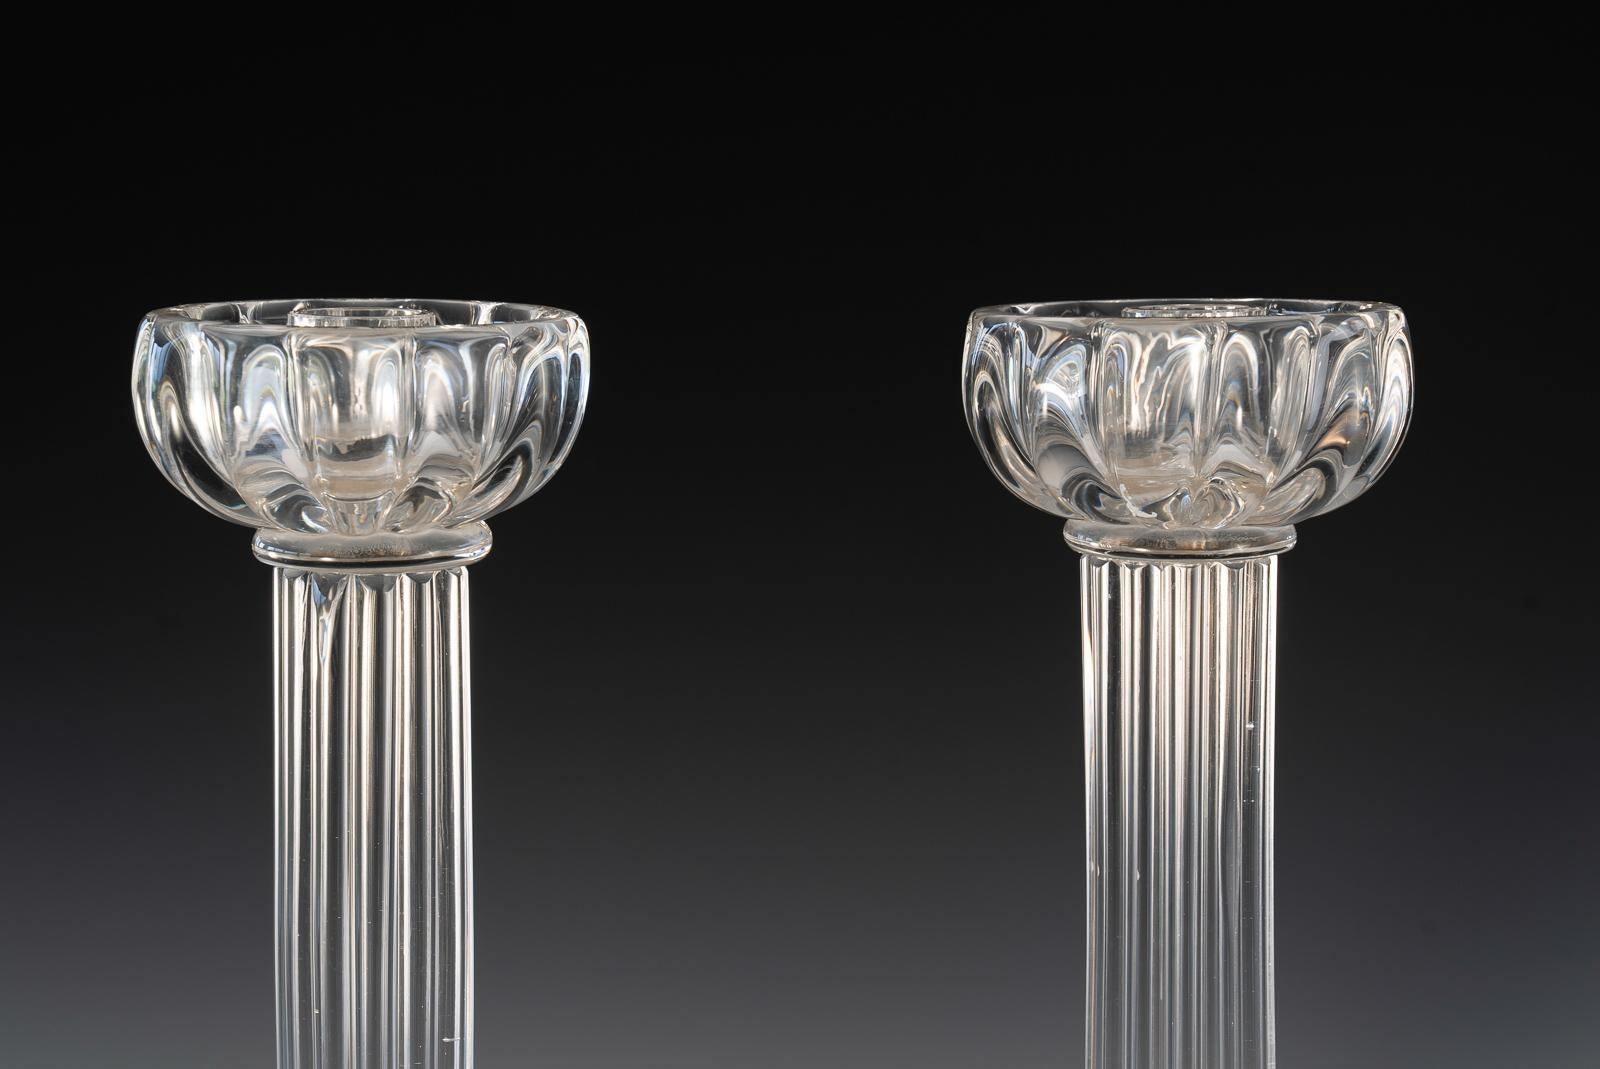 Italian Pair of Seguso Candlesticks 2 by John Loring of Tiffany & Co. For Sale